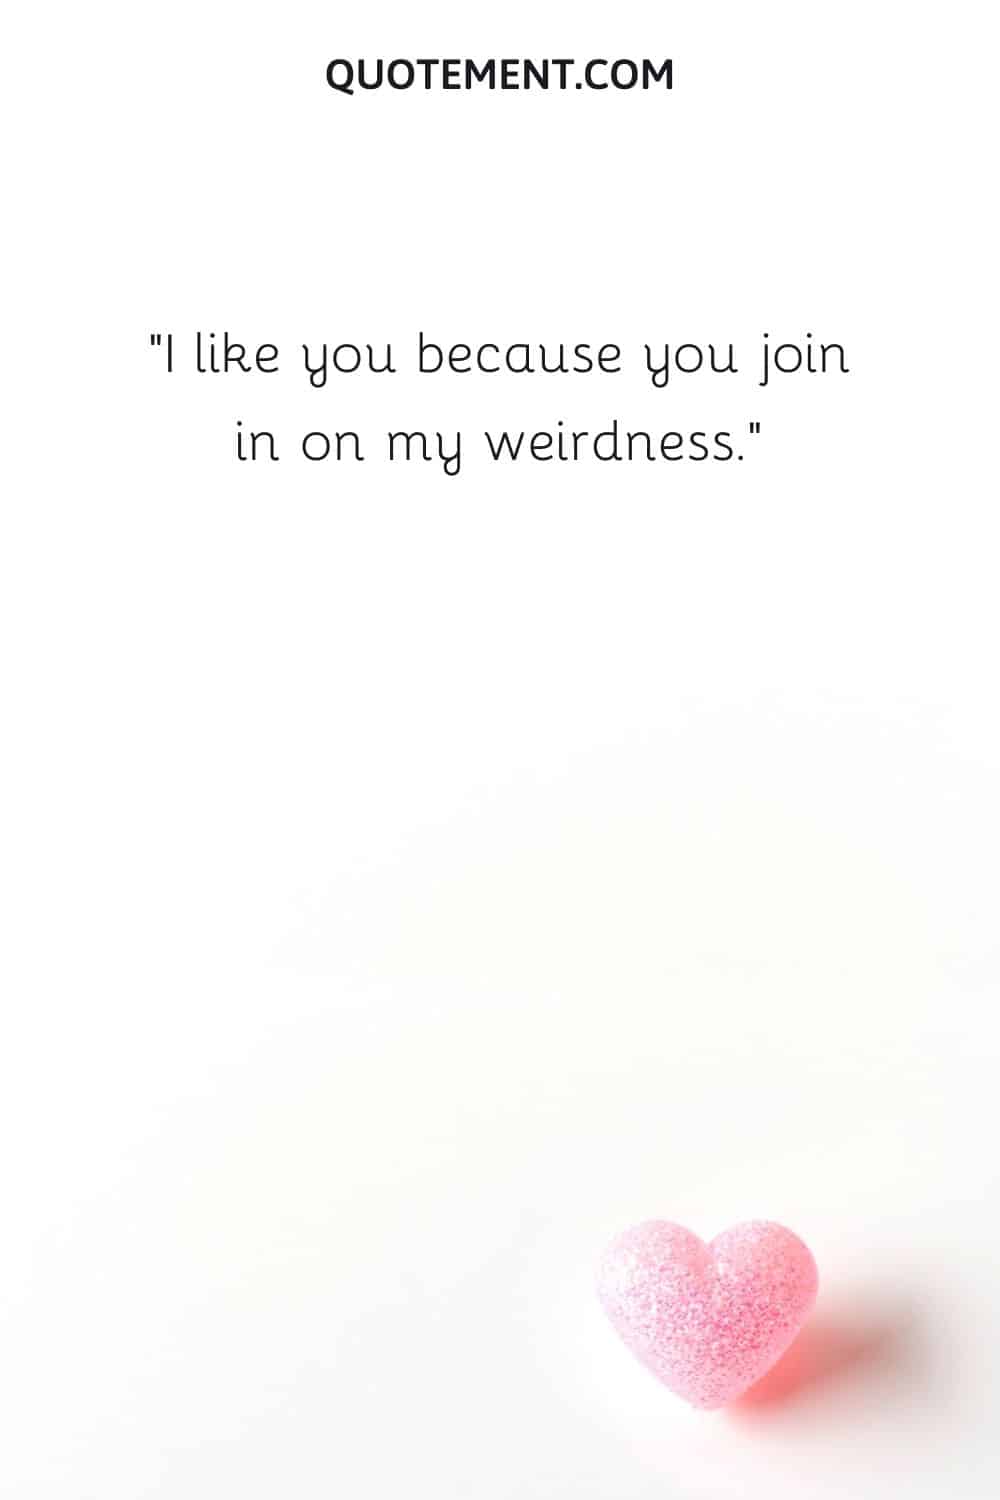 I like you because you join in on my weirdness.